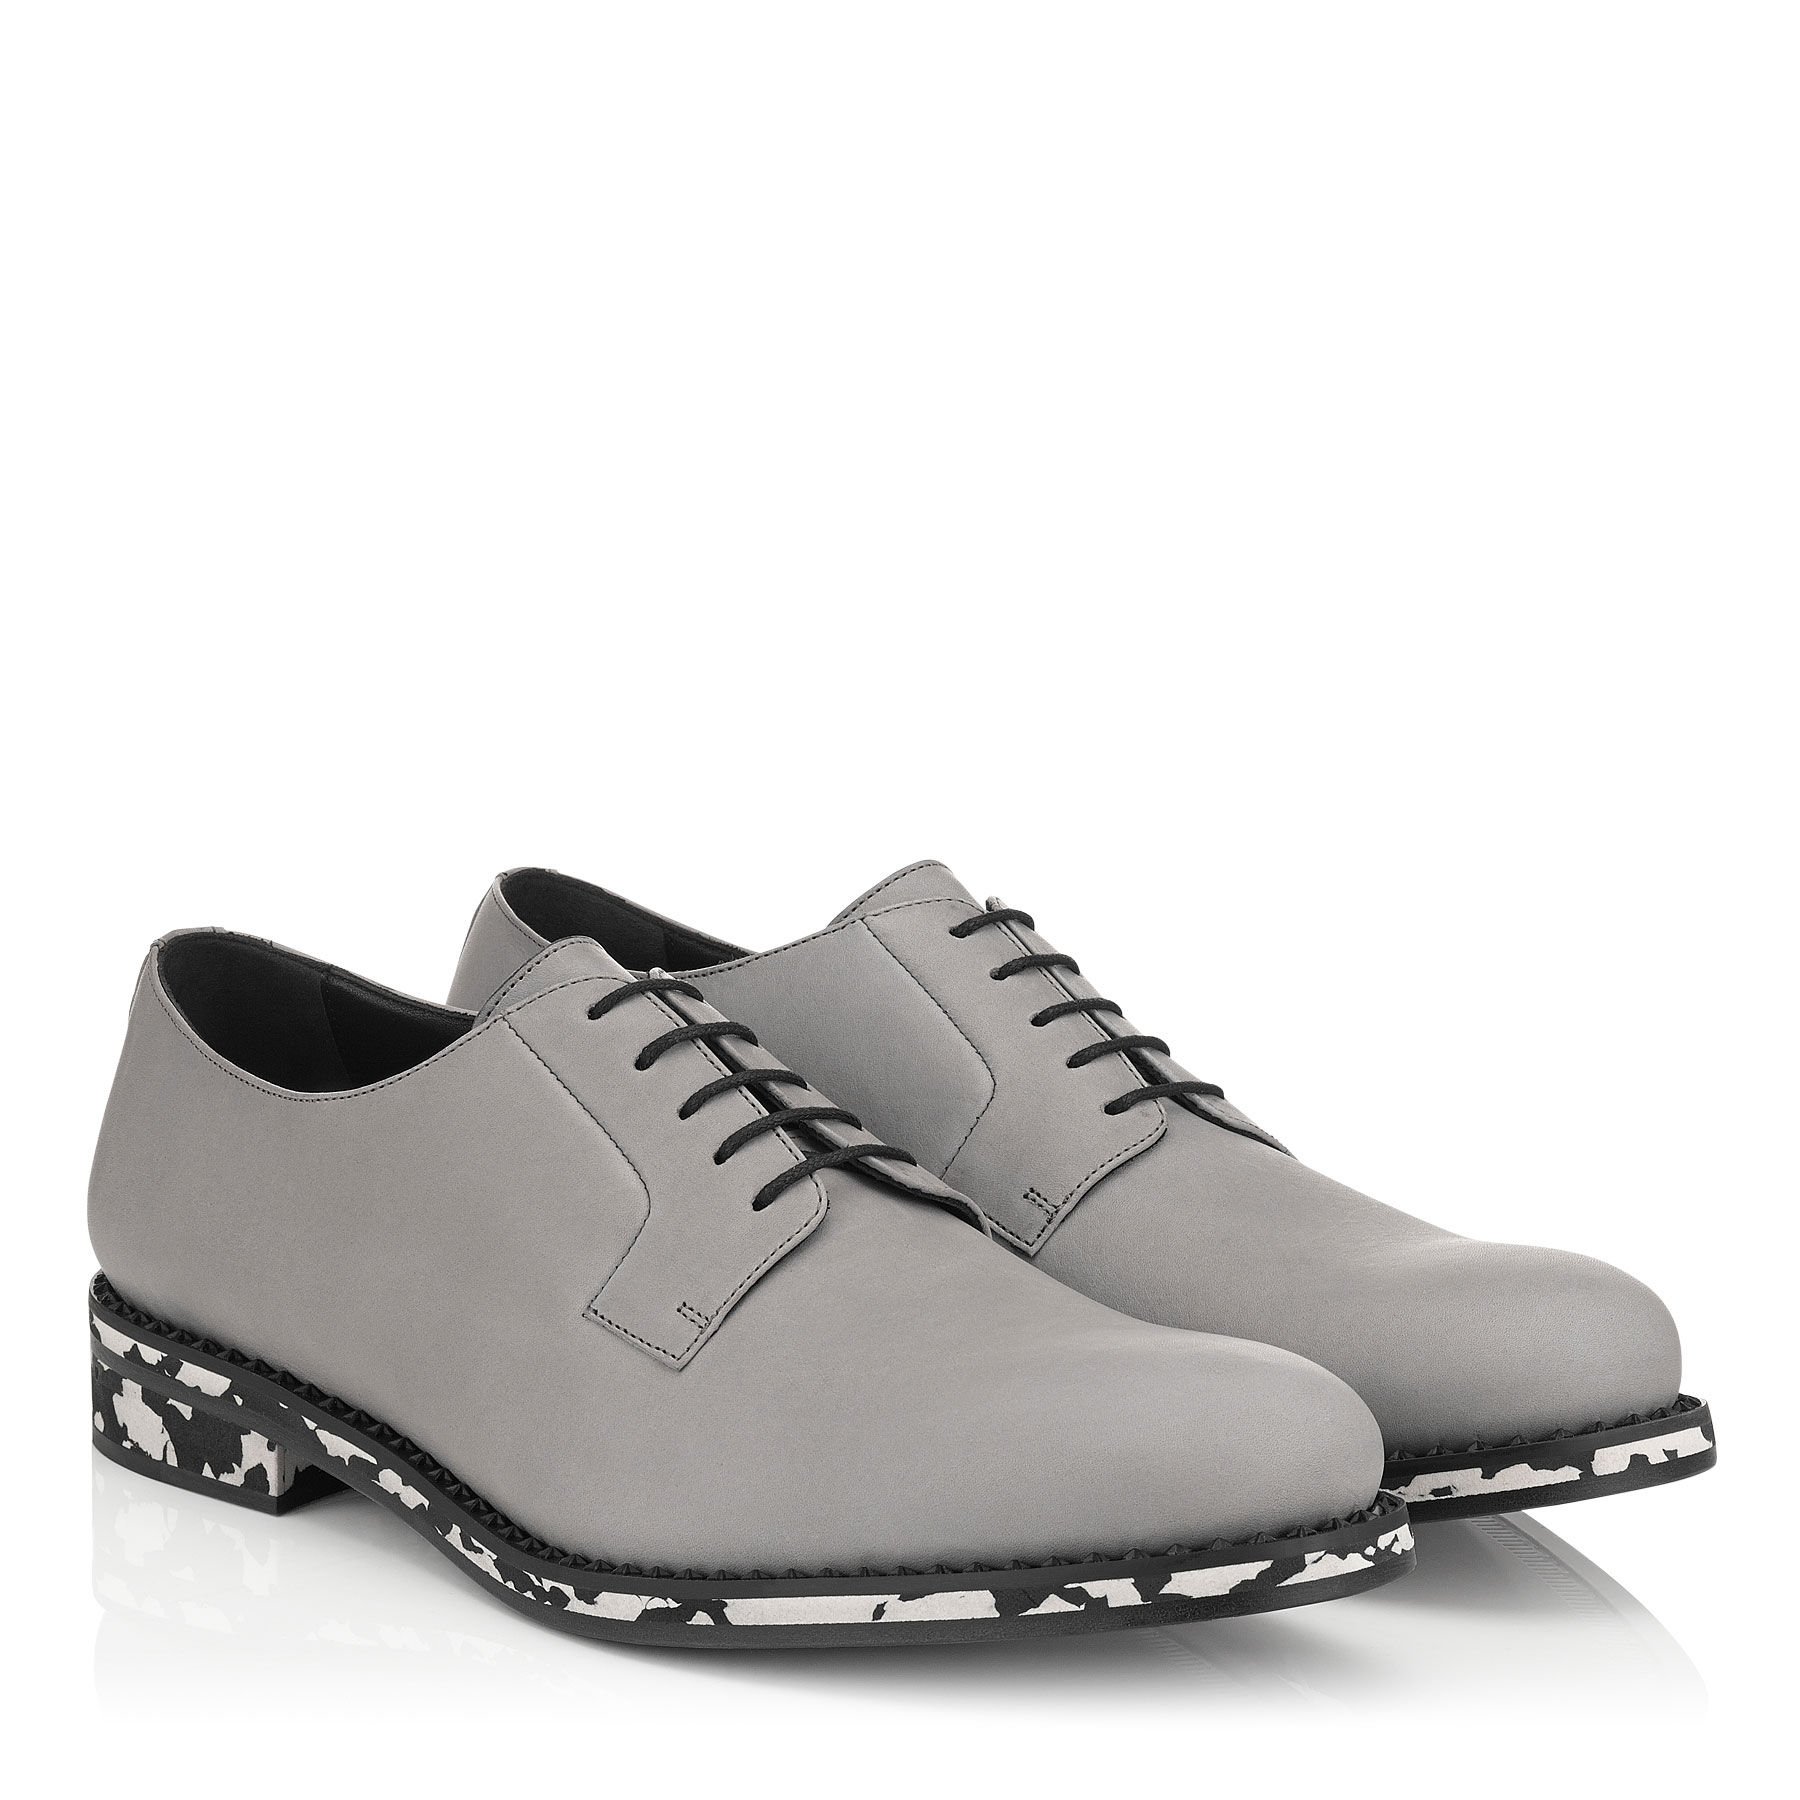 Jimmy Choo Alaric Grey Leather Lace Up Shoes in Gray for Men - Lyst